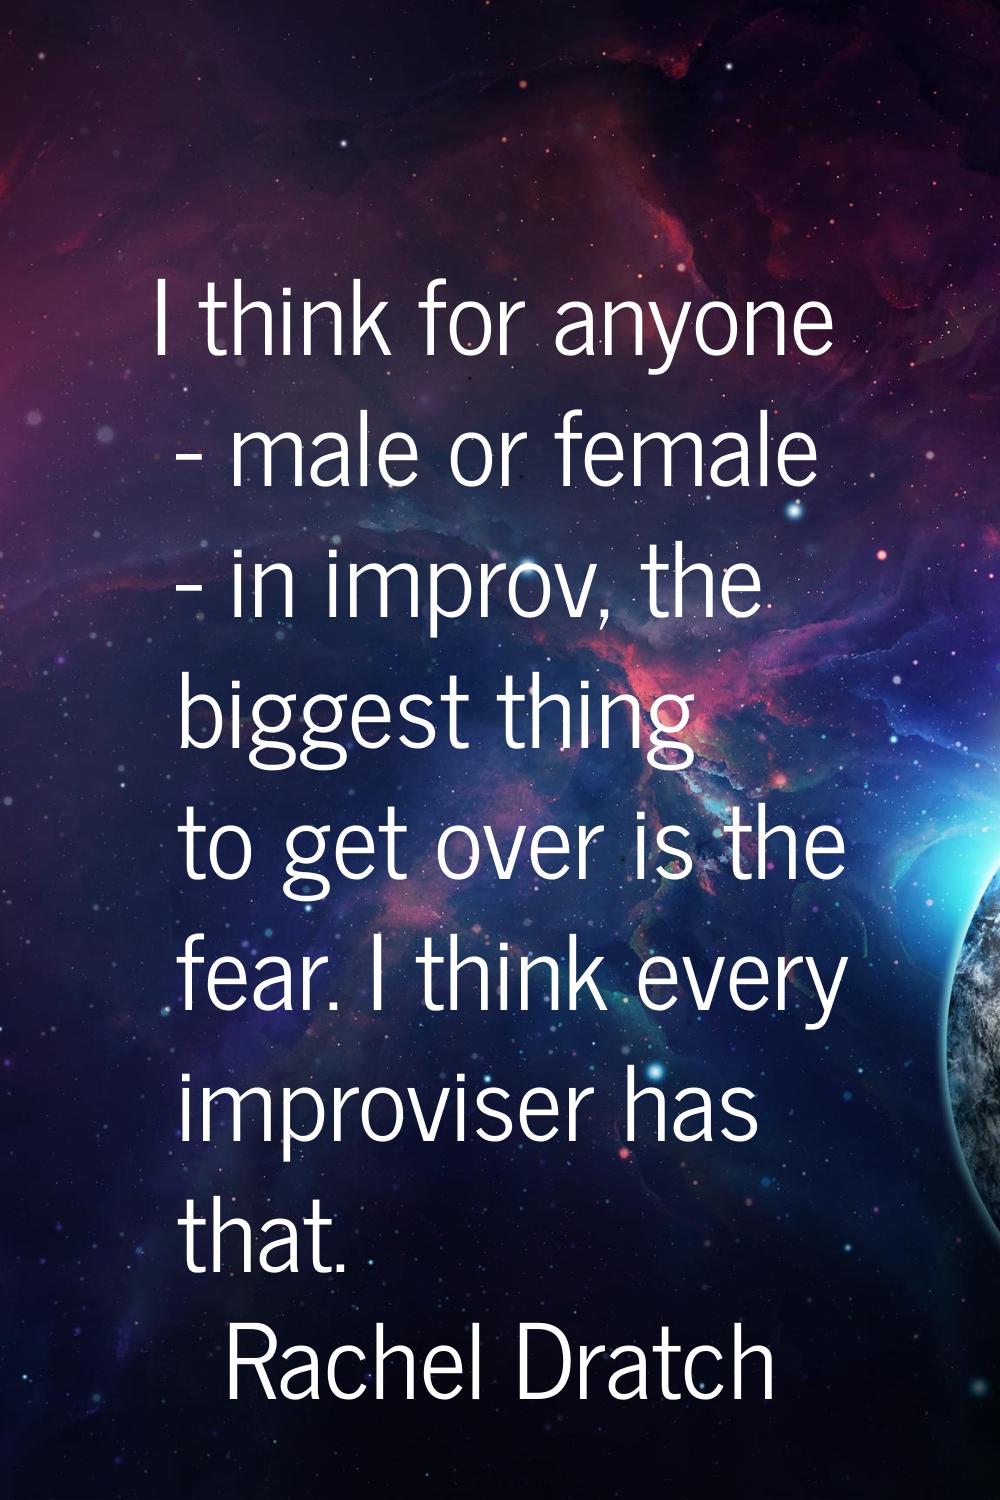 I think for anyone - male or female - in improv, the biggest thing to get over is the fear. I think